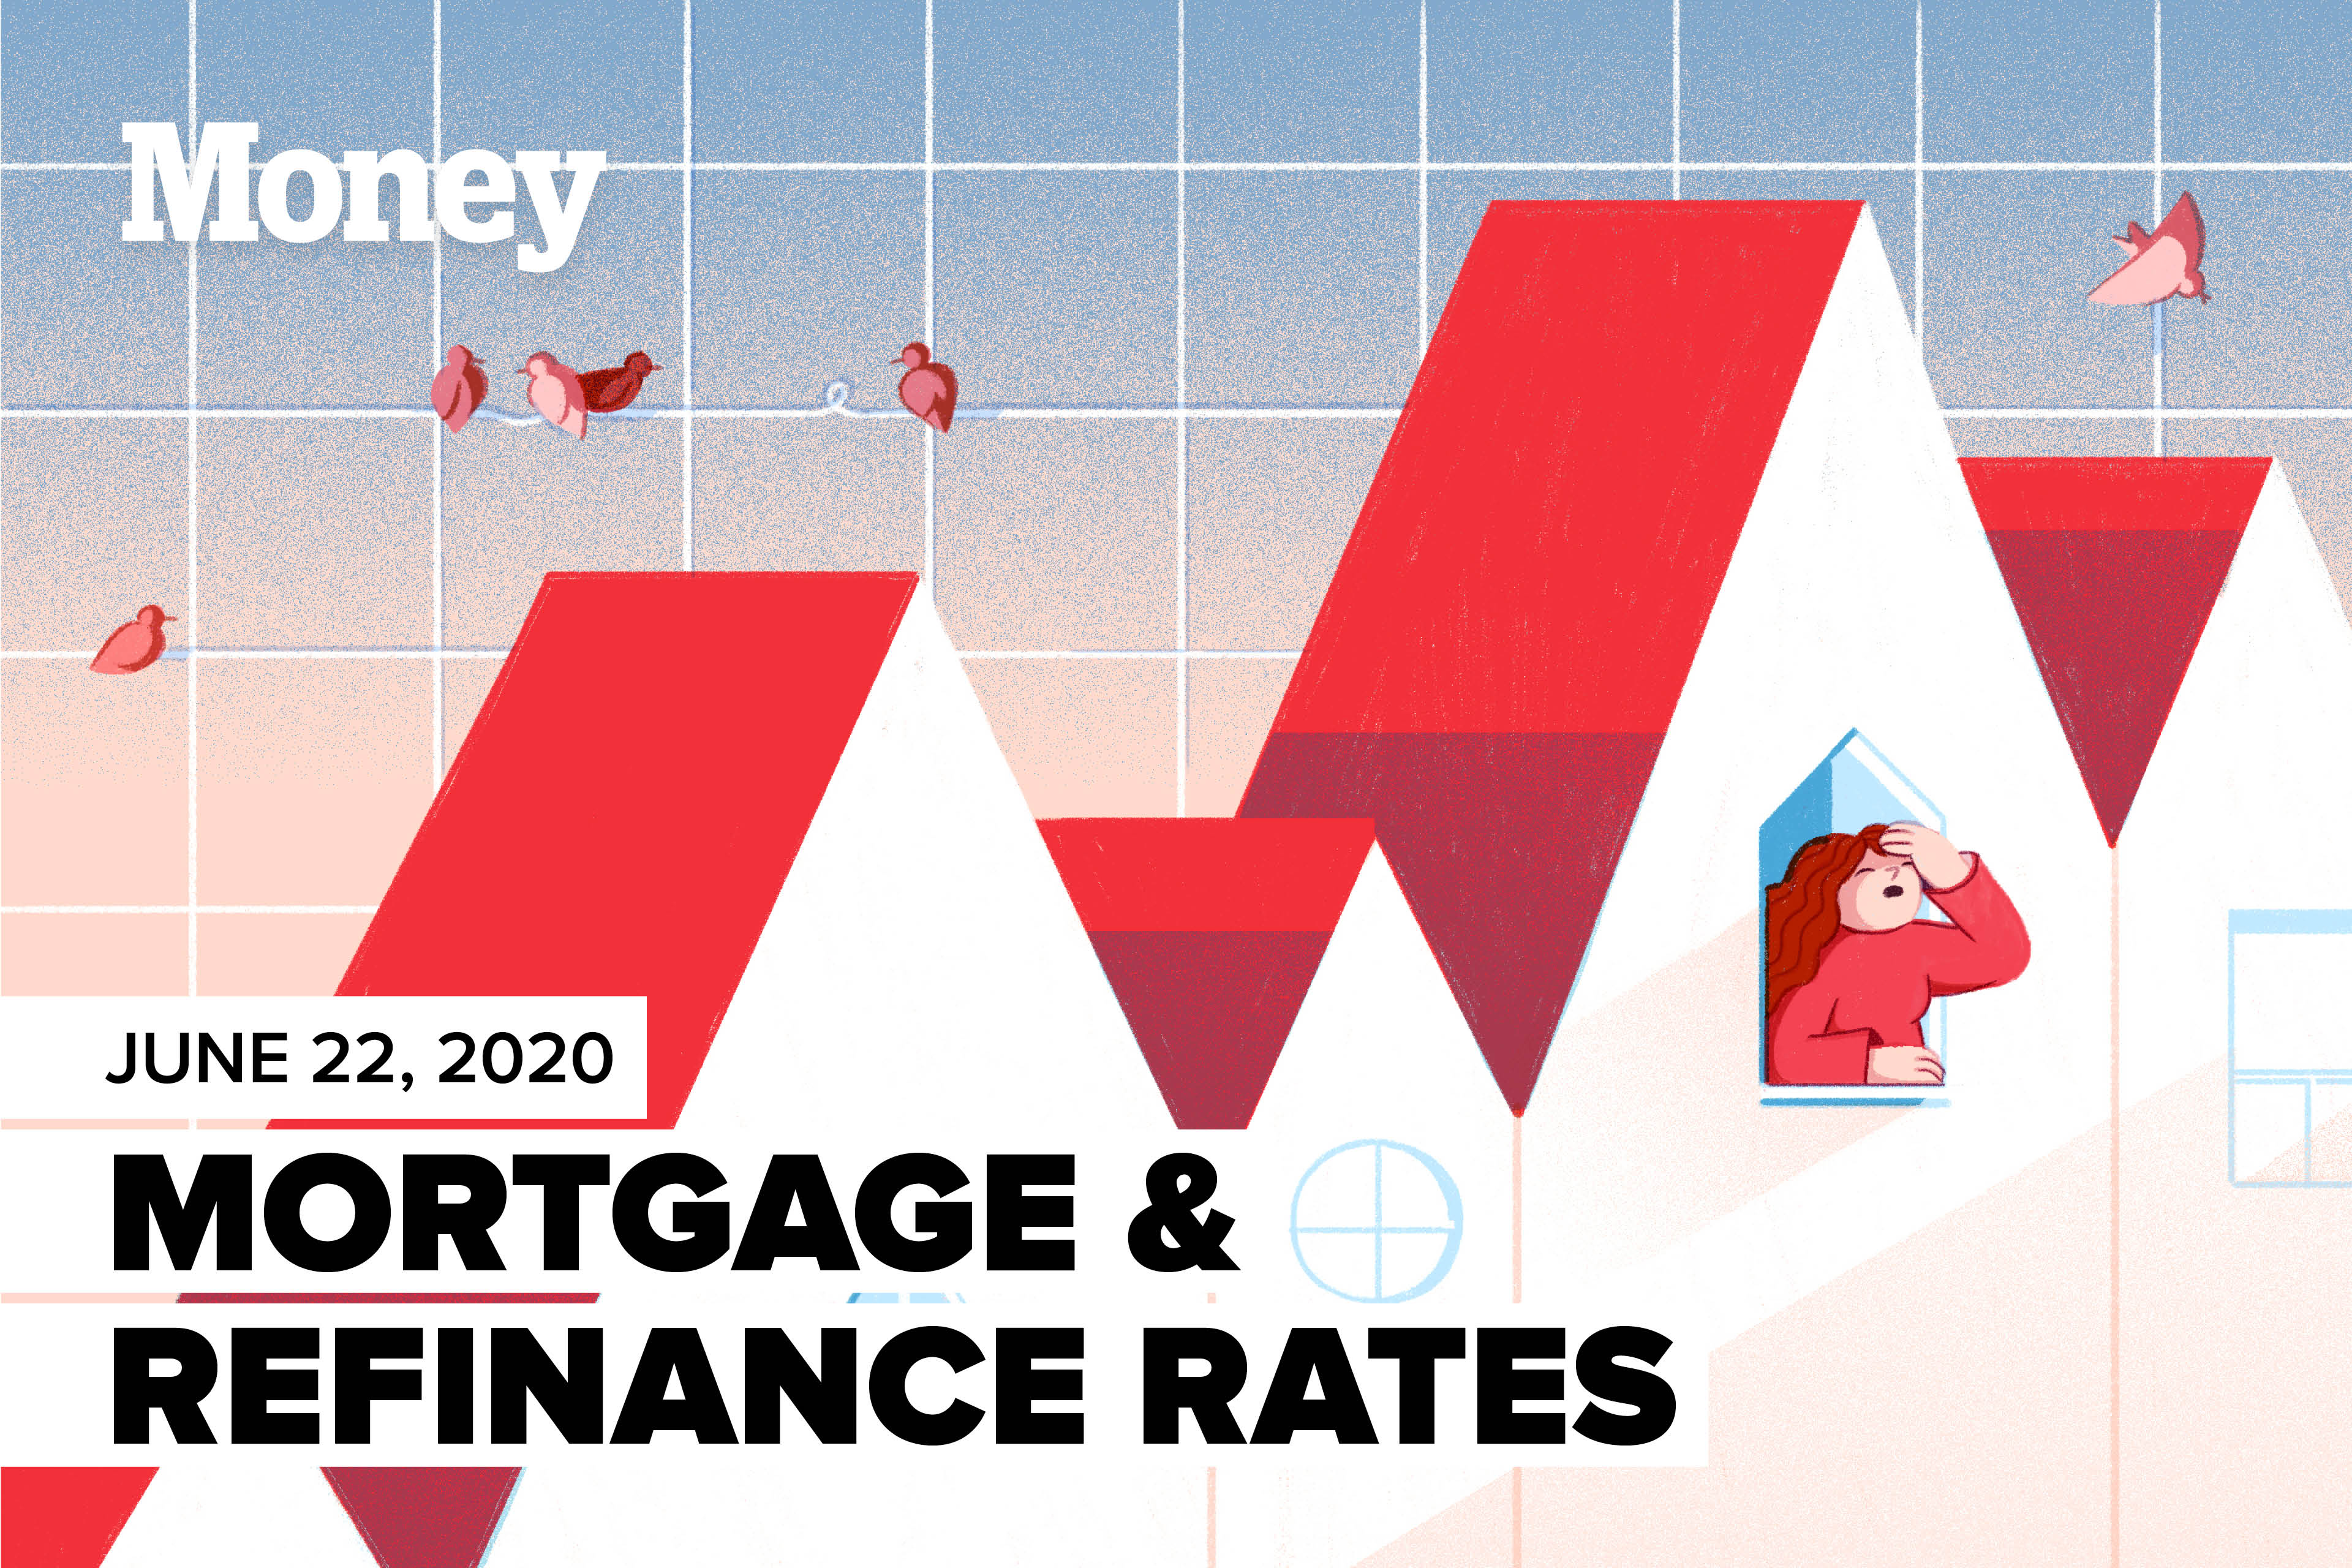 Here Are Today's Best Mortgage &amp; Refinance Rates for June 22, 2020